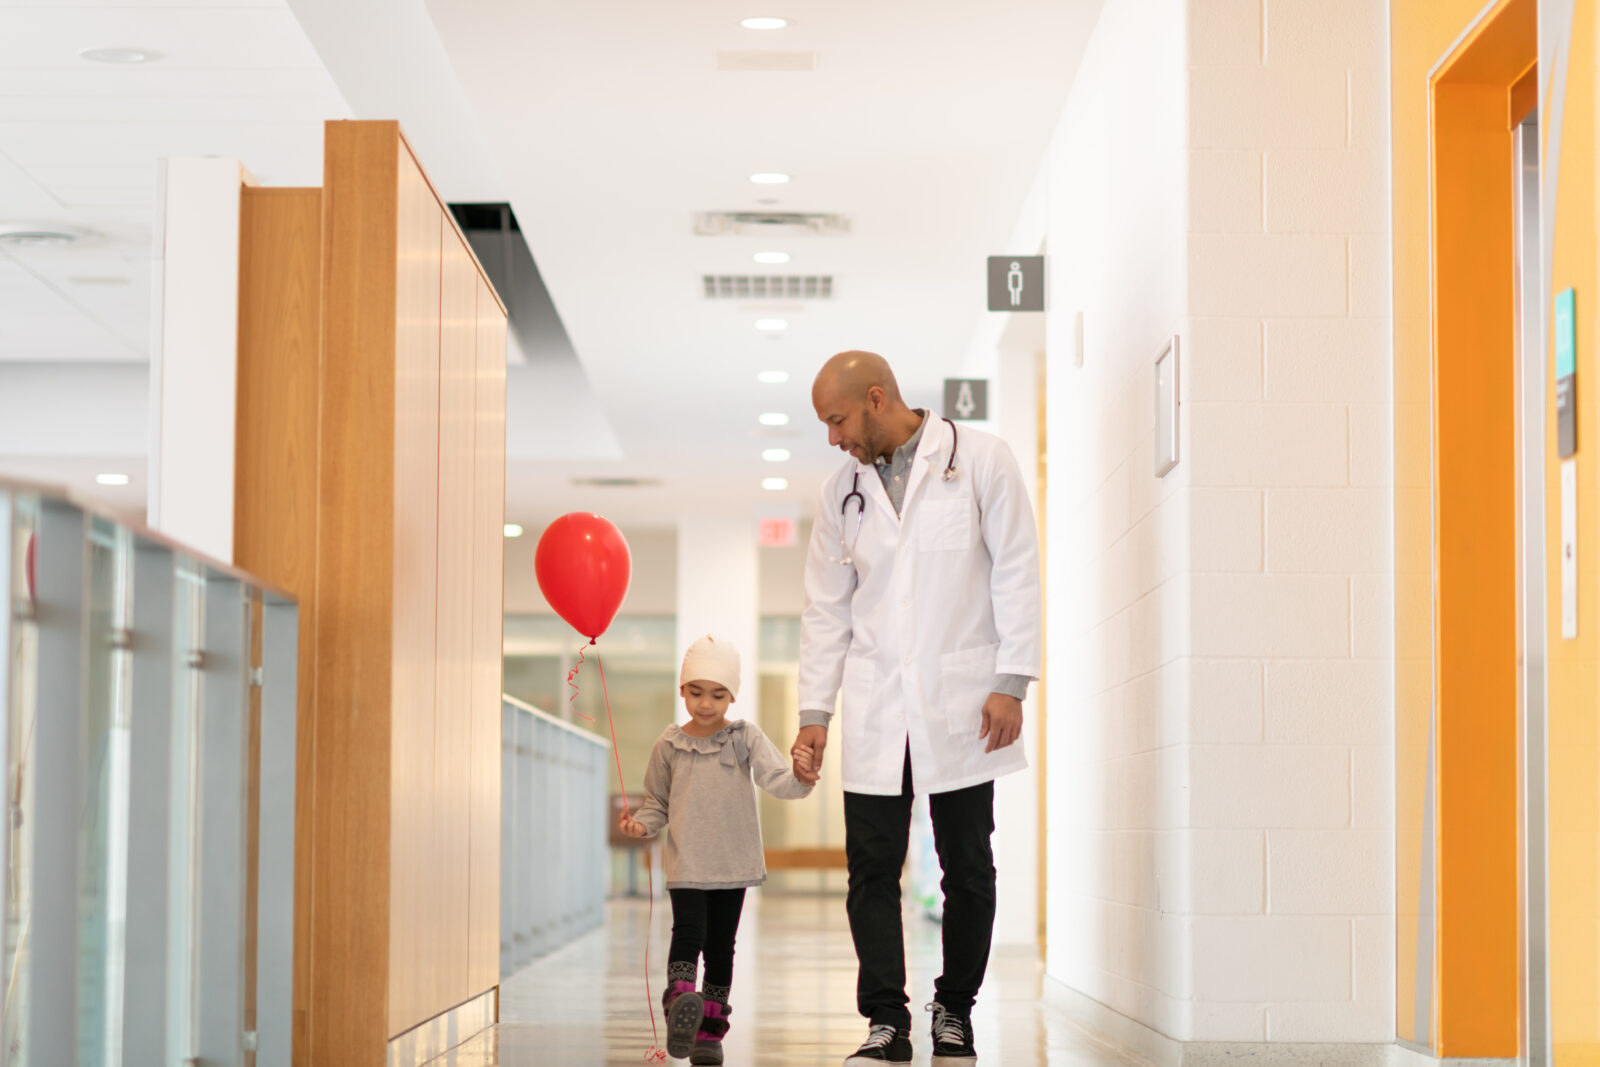 Child with balloon holds doctor's hand in hospital corridor